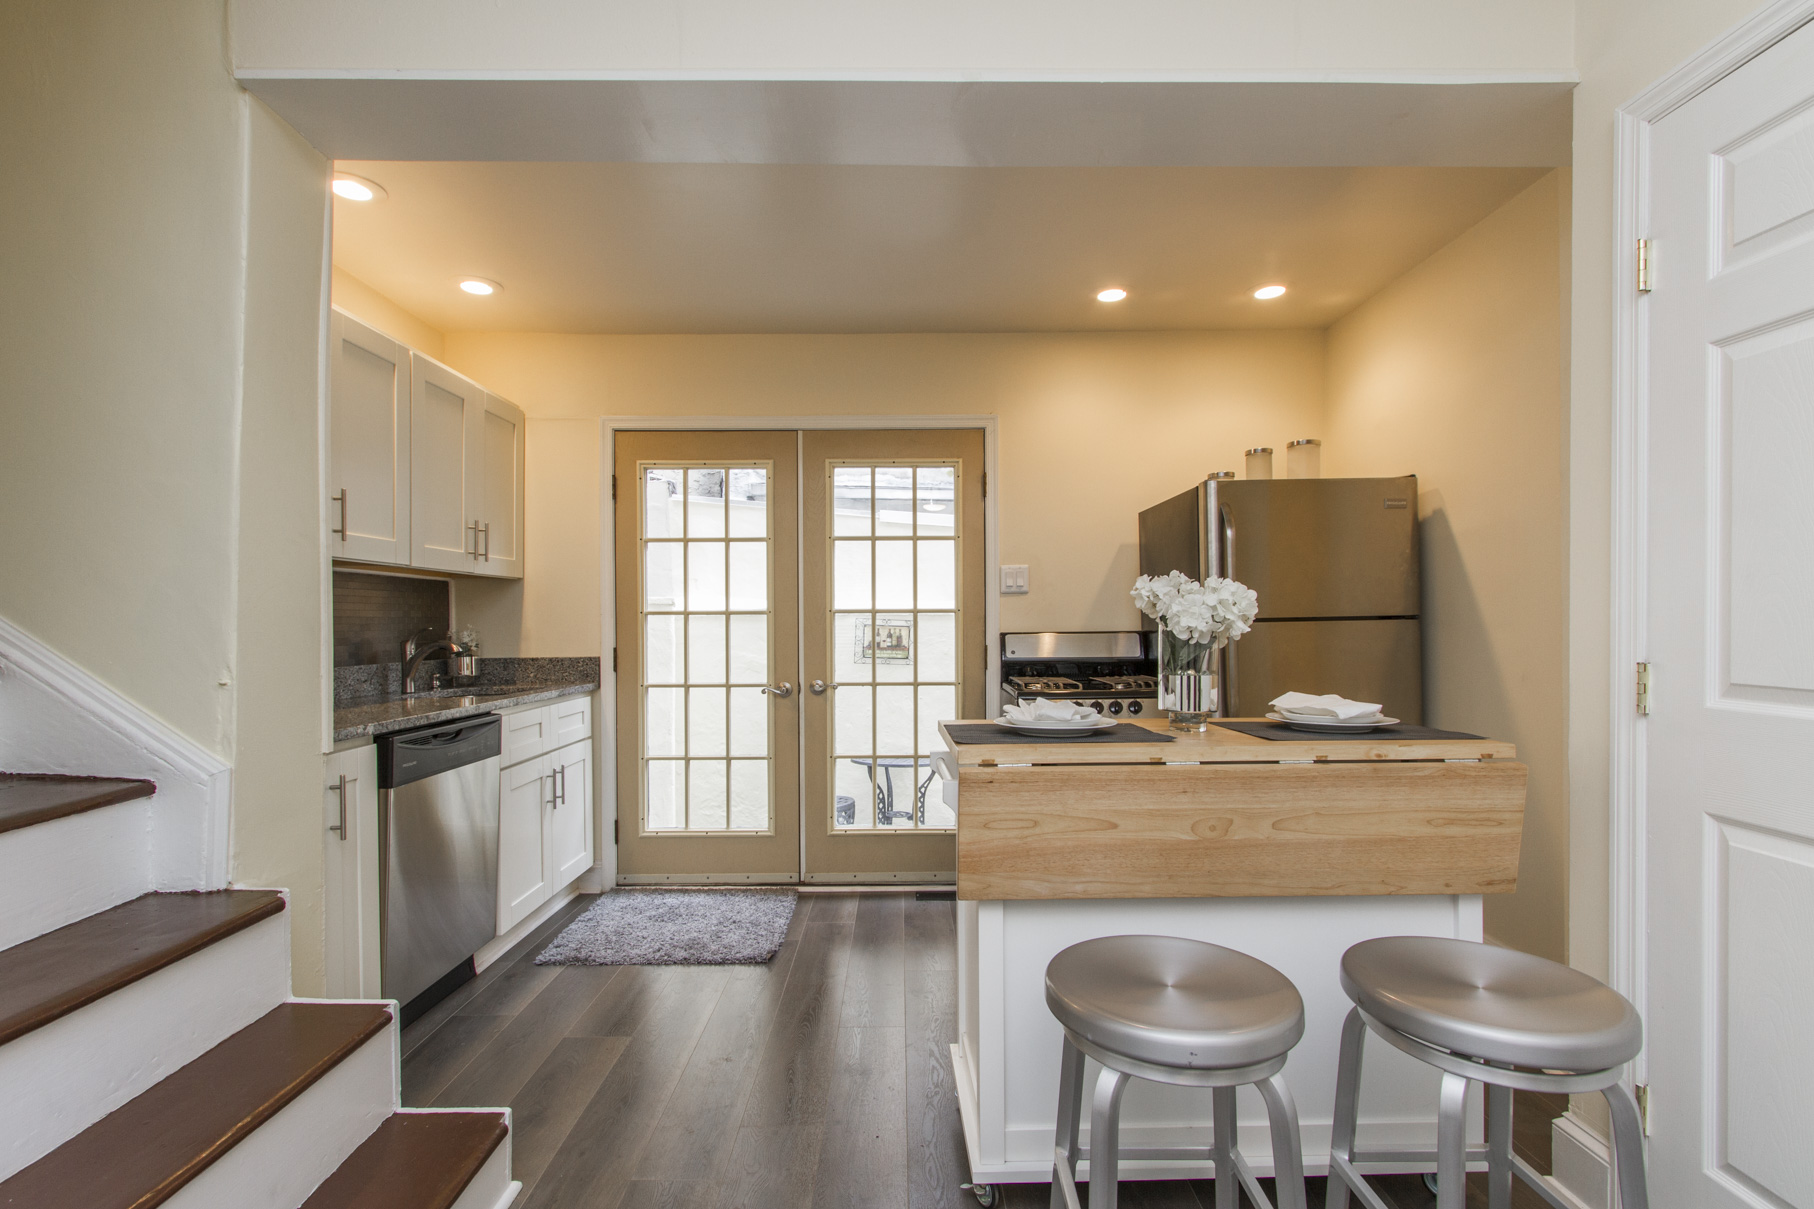 A kitchen with steel bar stools, laminate floors, and French doors.